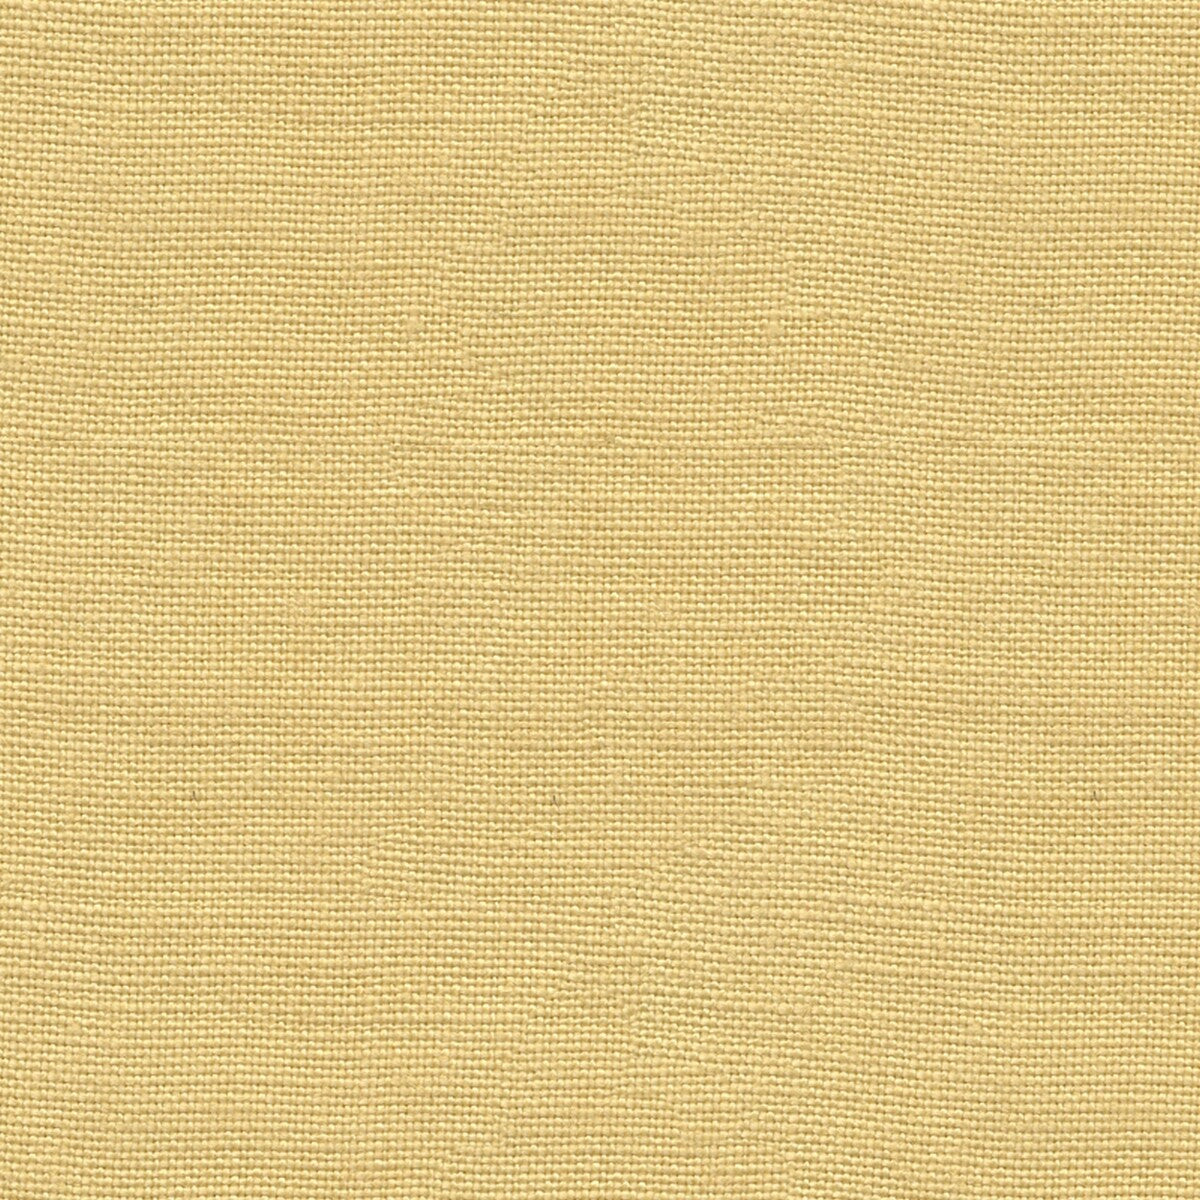 Lea fabric in buttermilk color - pattern J0337.125.0 - by G P &amp; J Baker in the Crayford collection